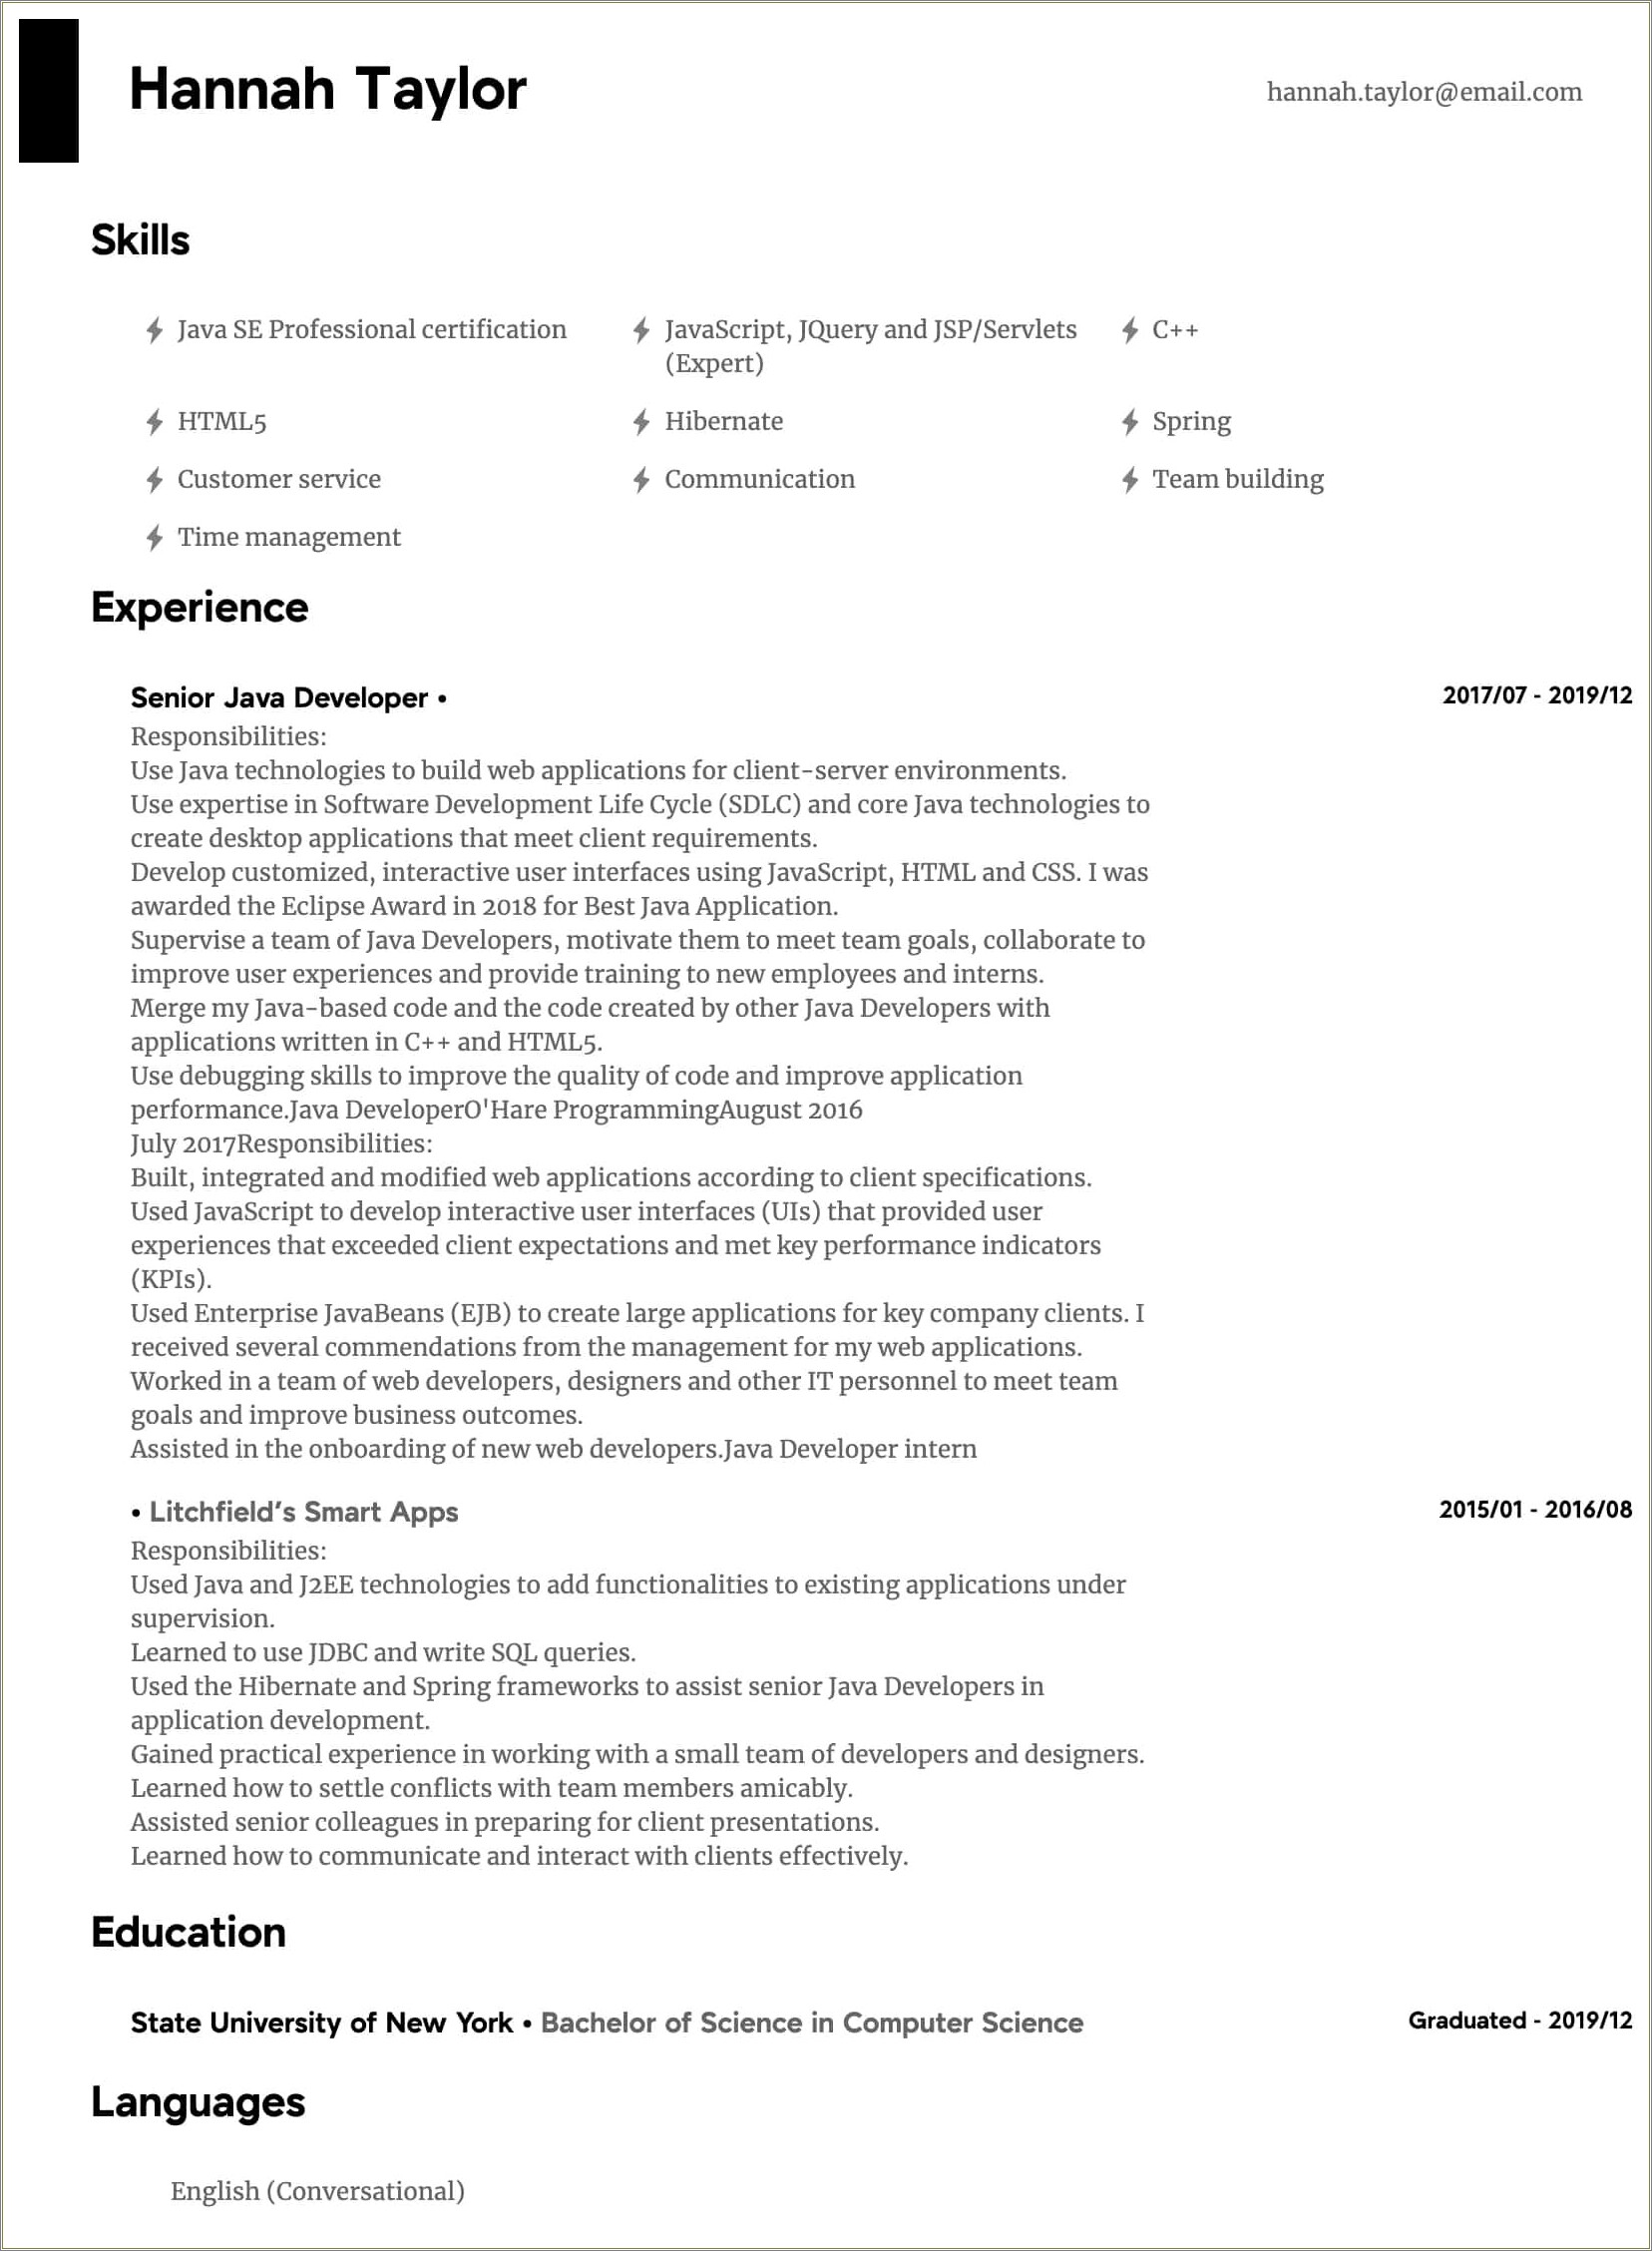 Resume Examples 2017 15 Years Experience